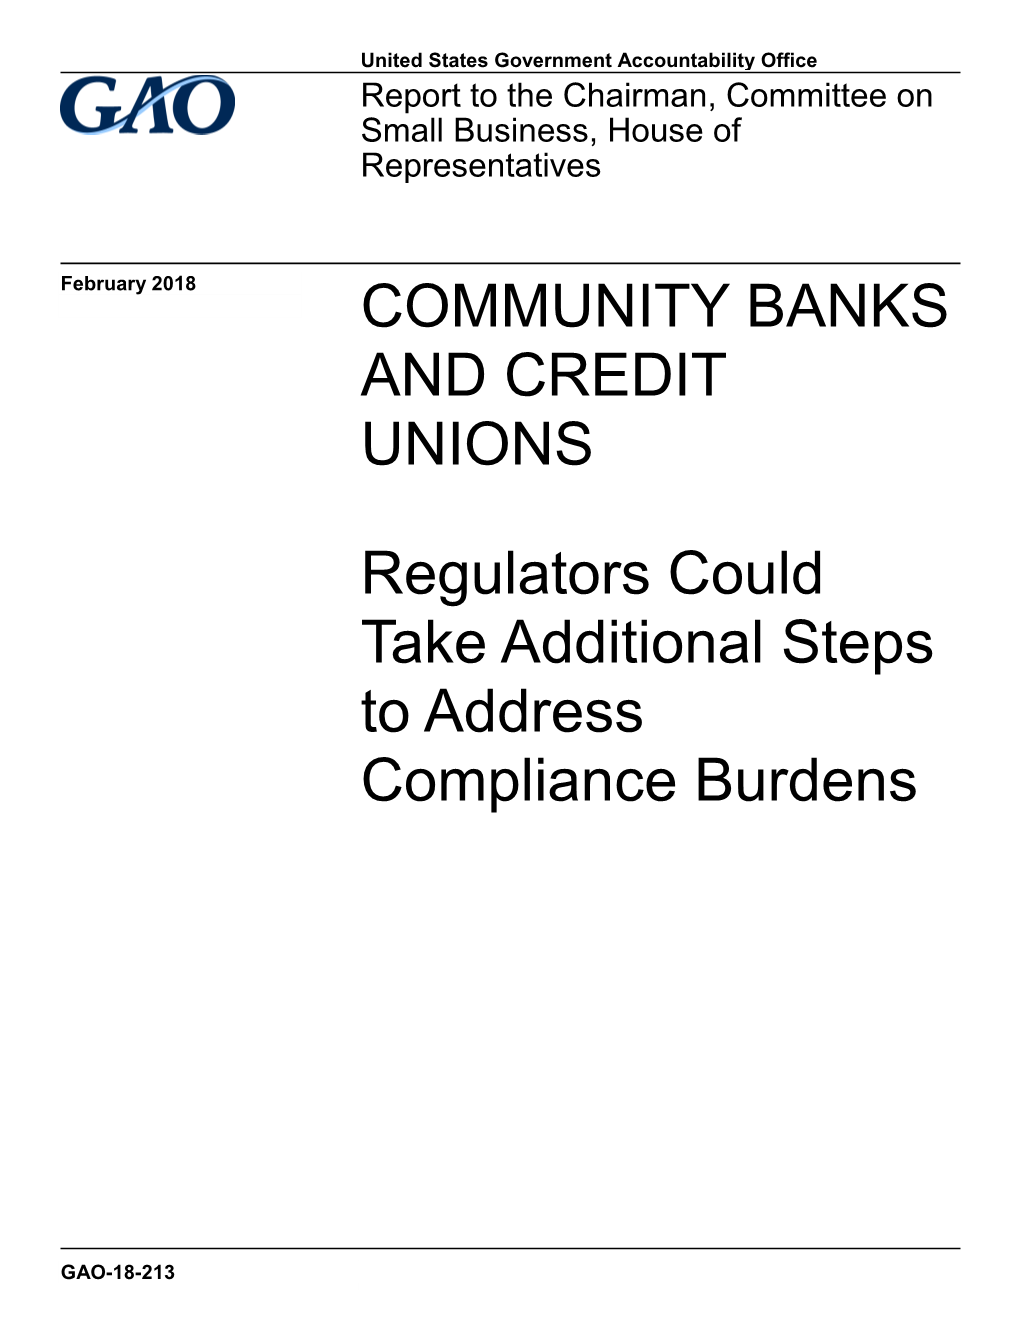 Community Banks and Credit Unions